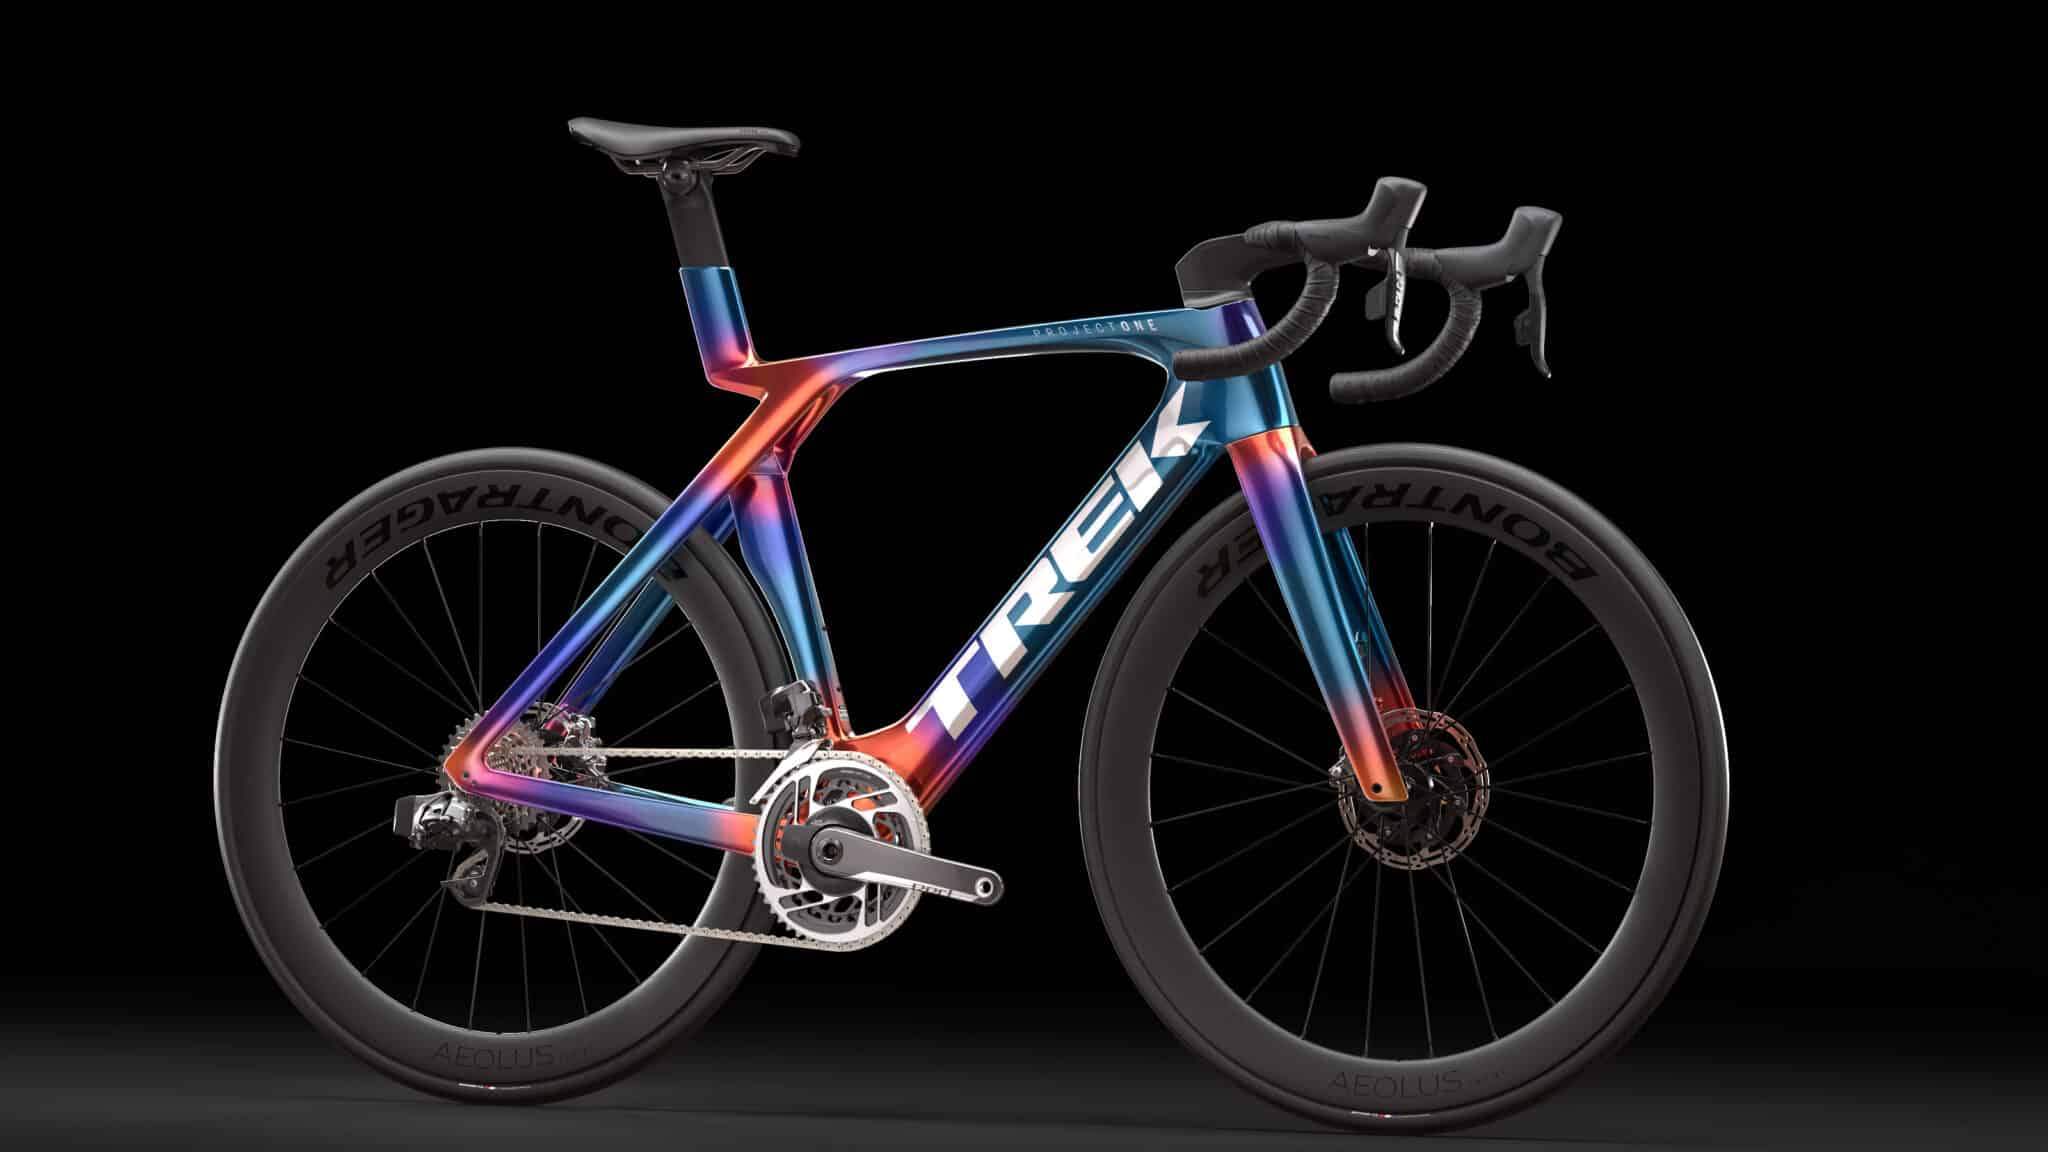 Trek Bicycle Competes in Tour de France With Bikes Developed Using NVIDIA GPUs